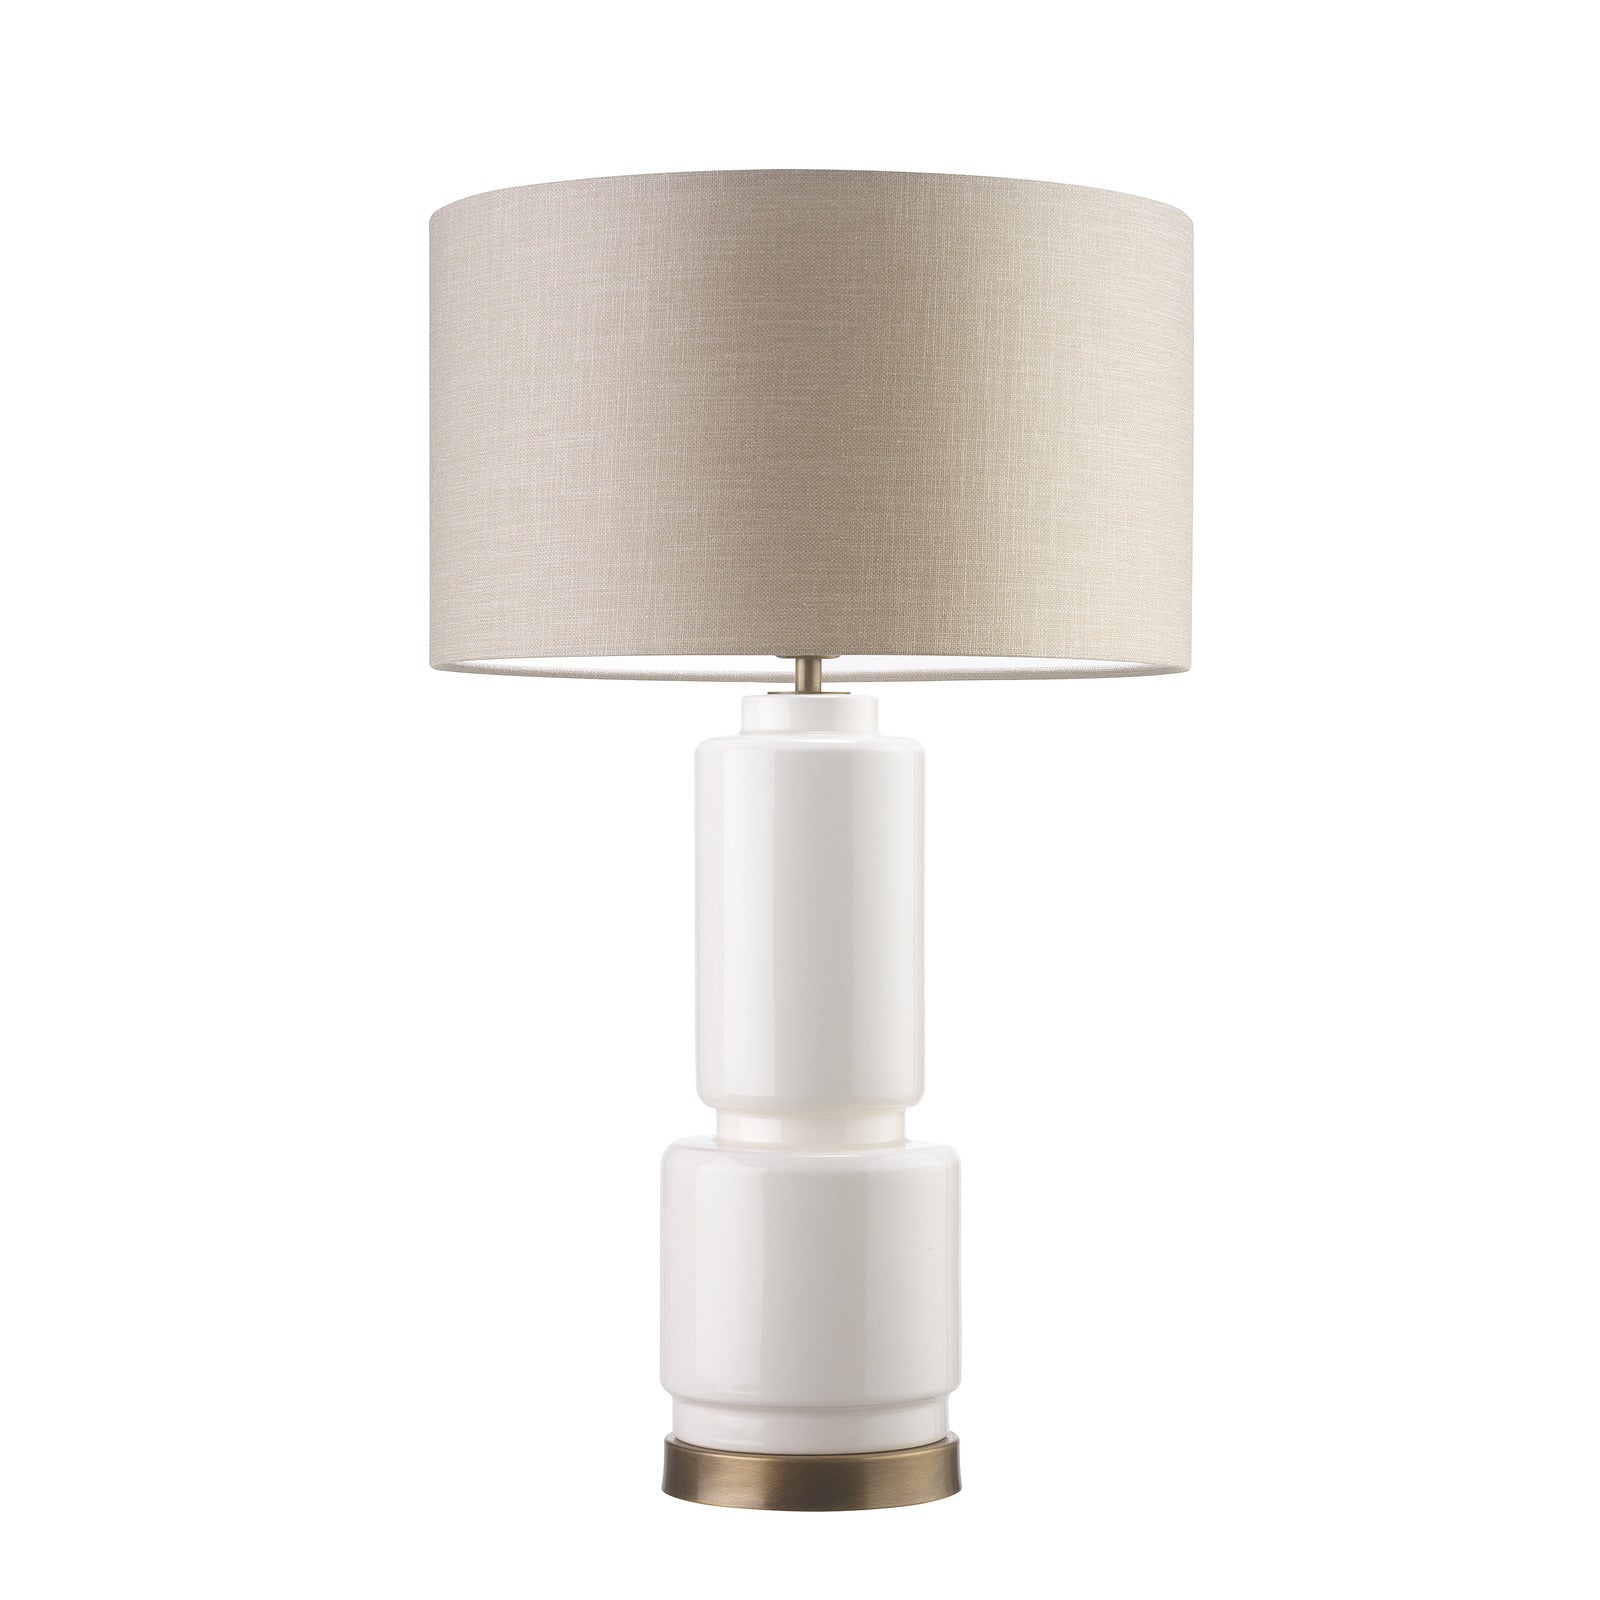 Allende Table Lamp